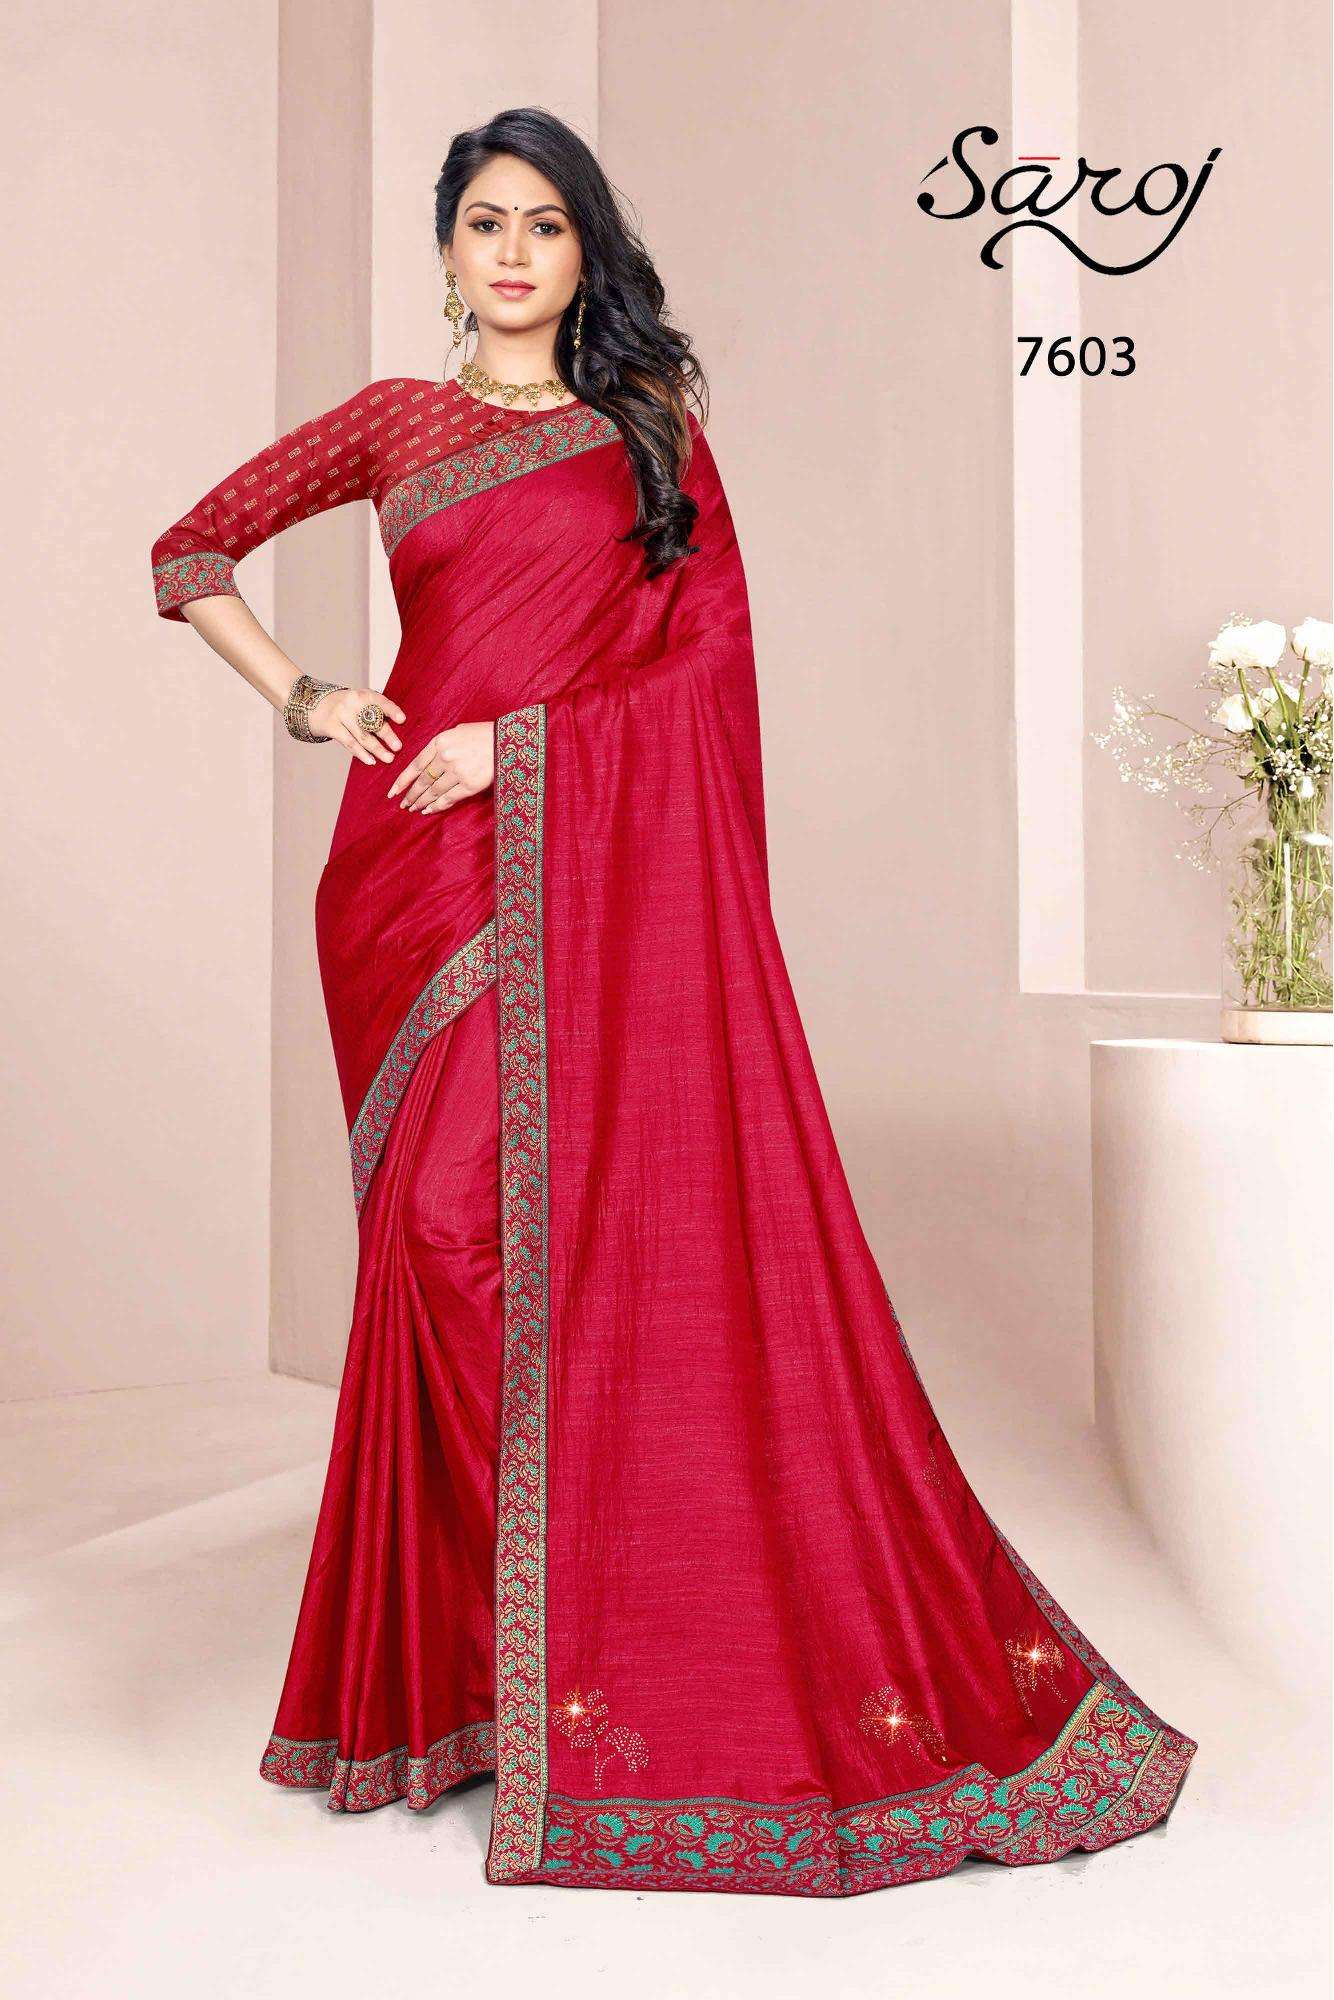 Queen Pink Party Wear Silk Saree Available Wholesale In India